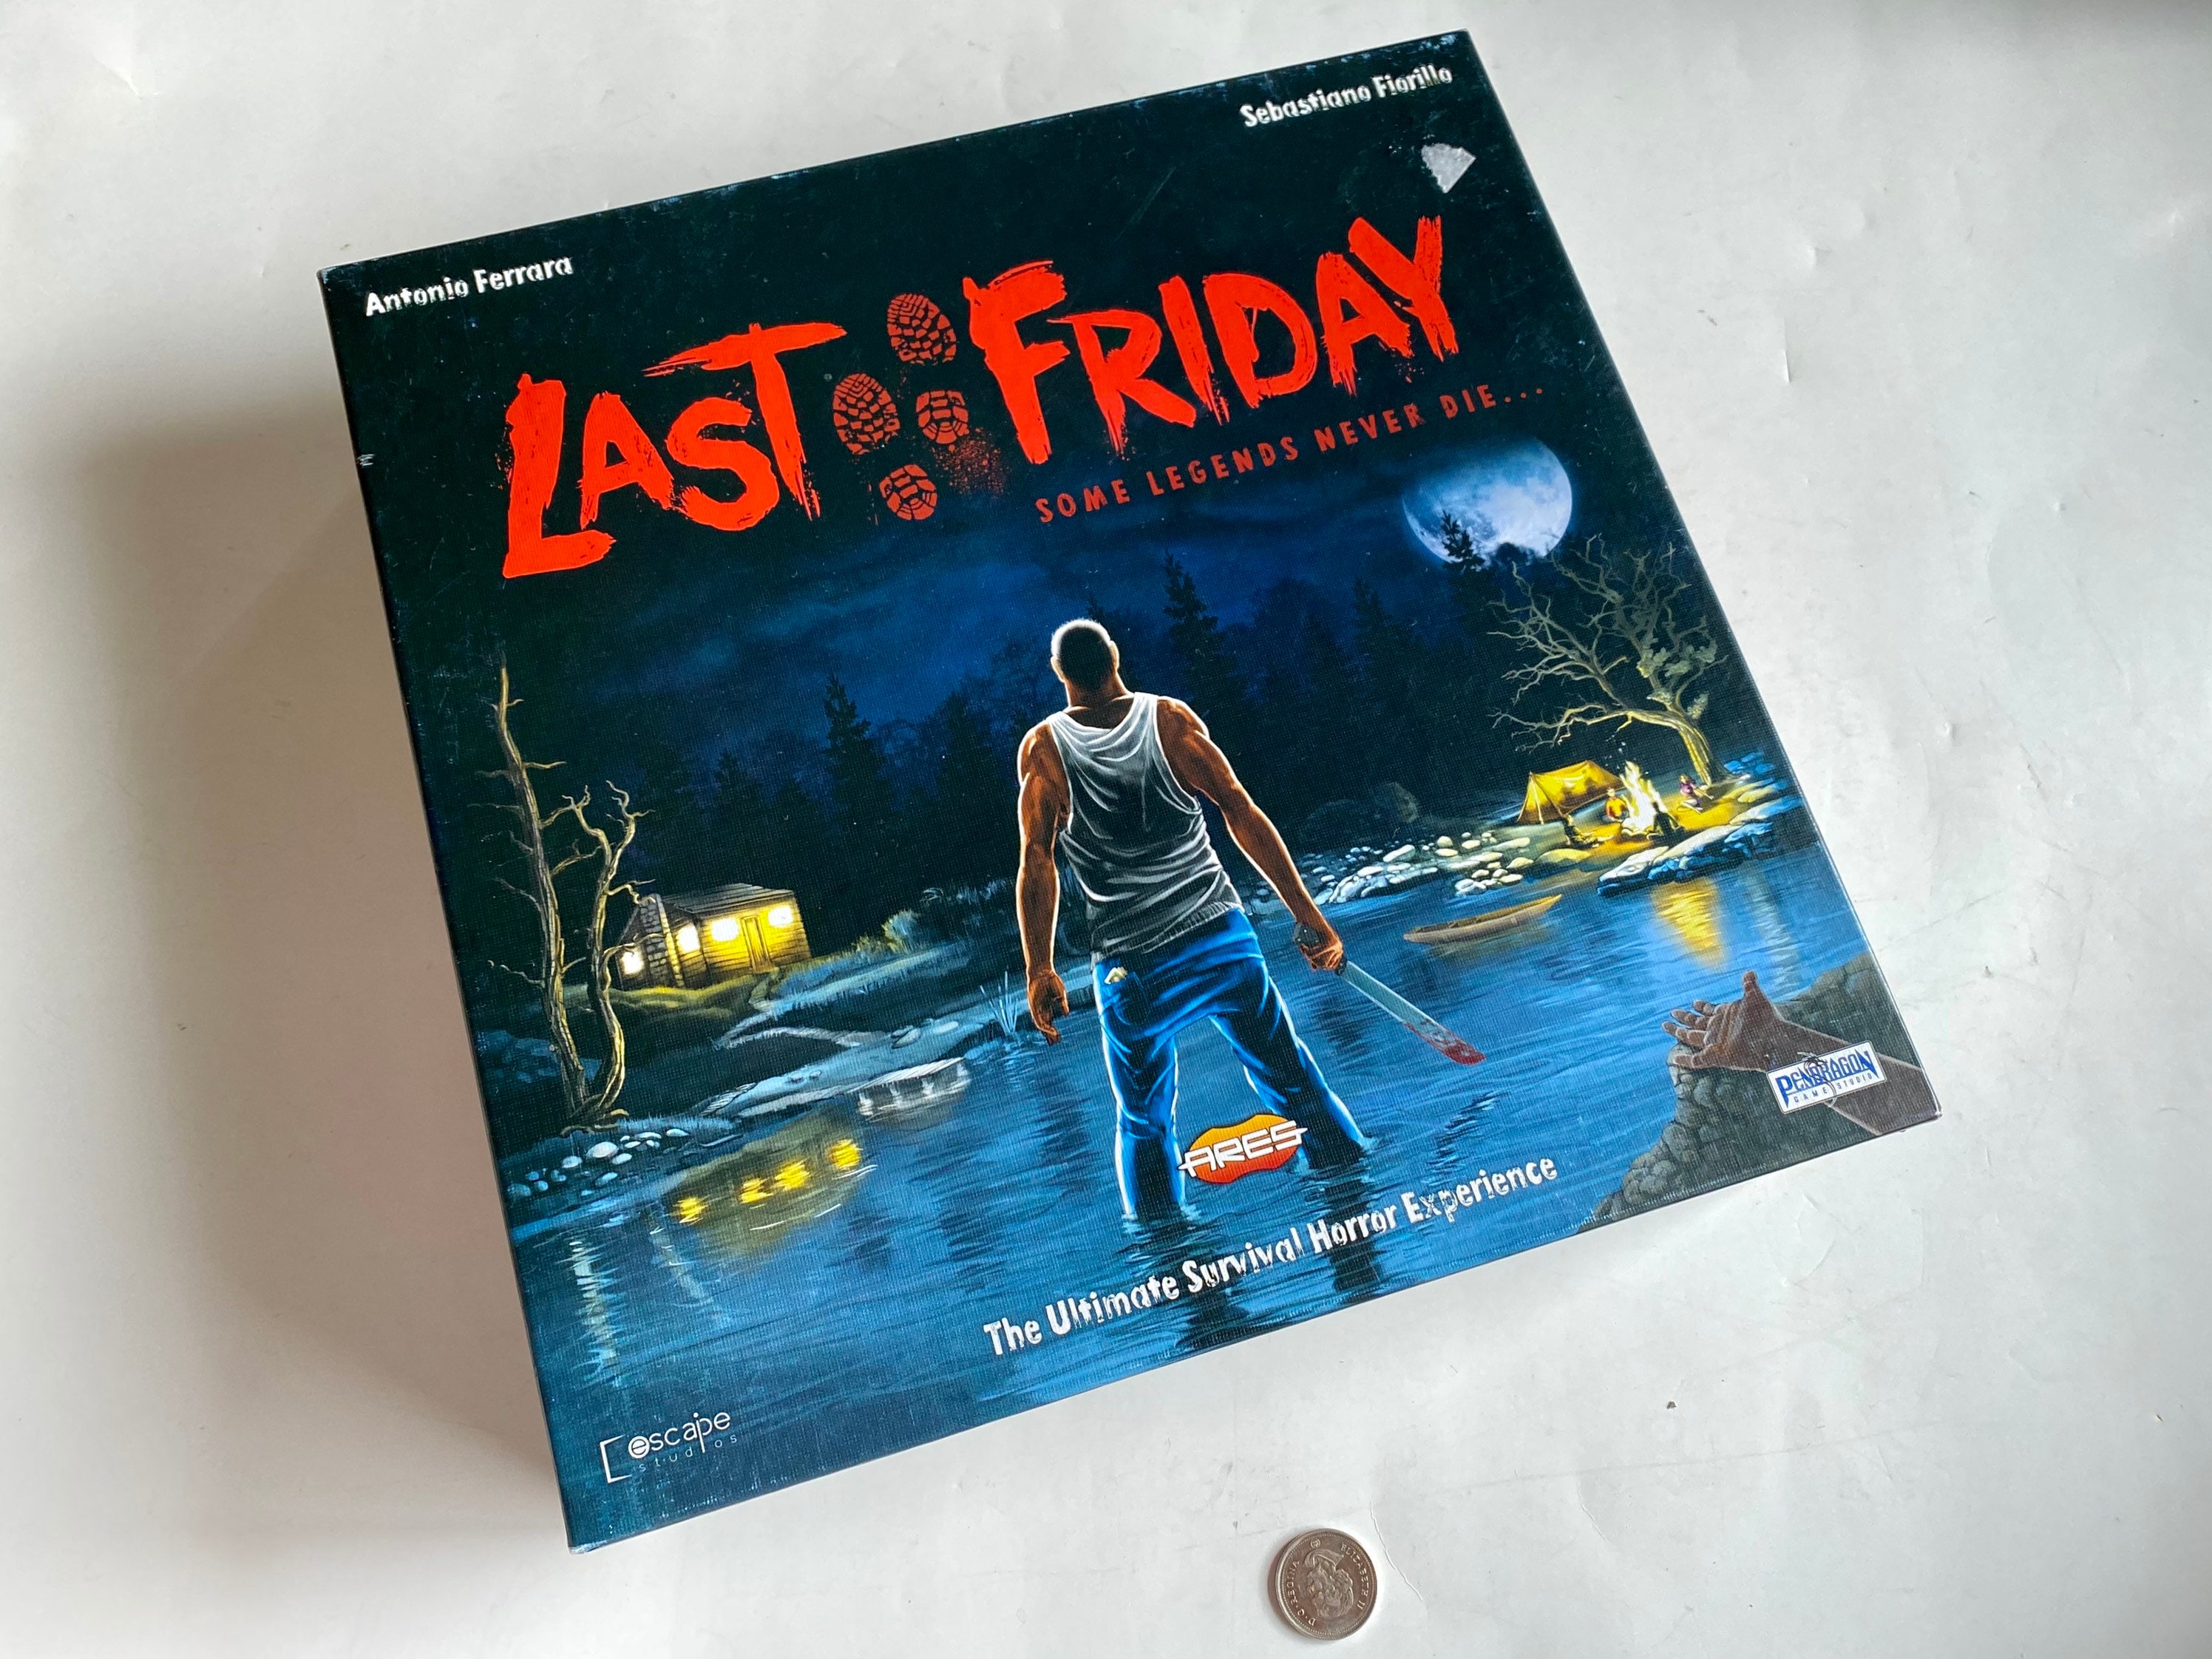 Last Friday - A Survival Horror Board Game